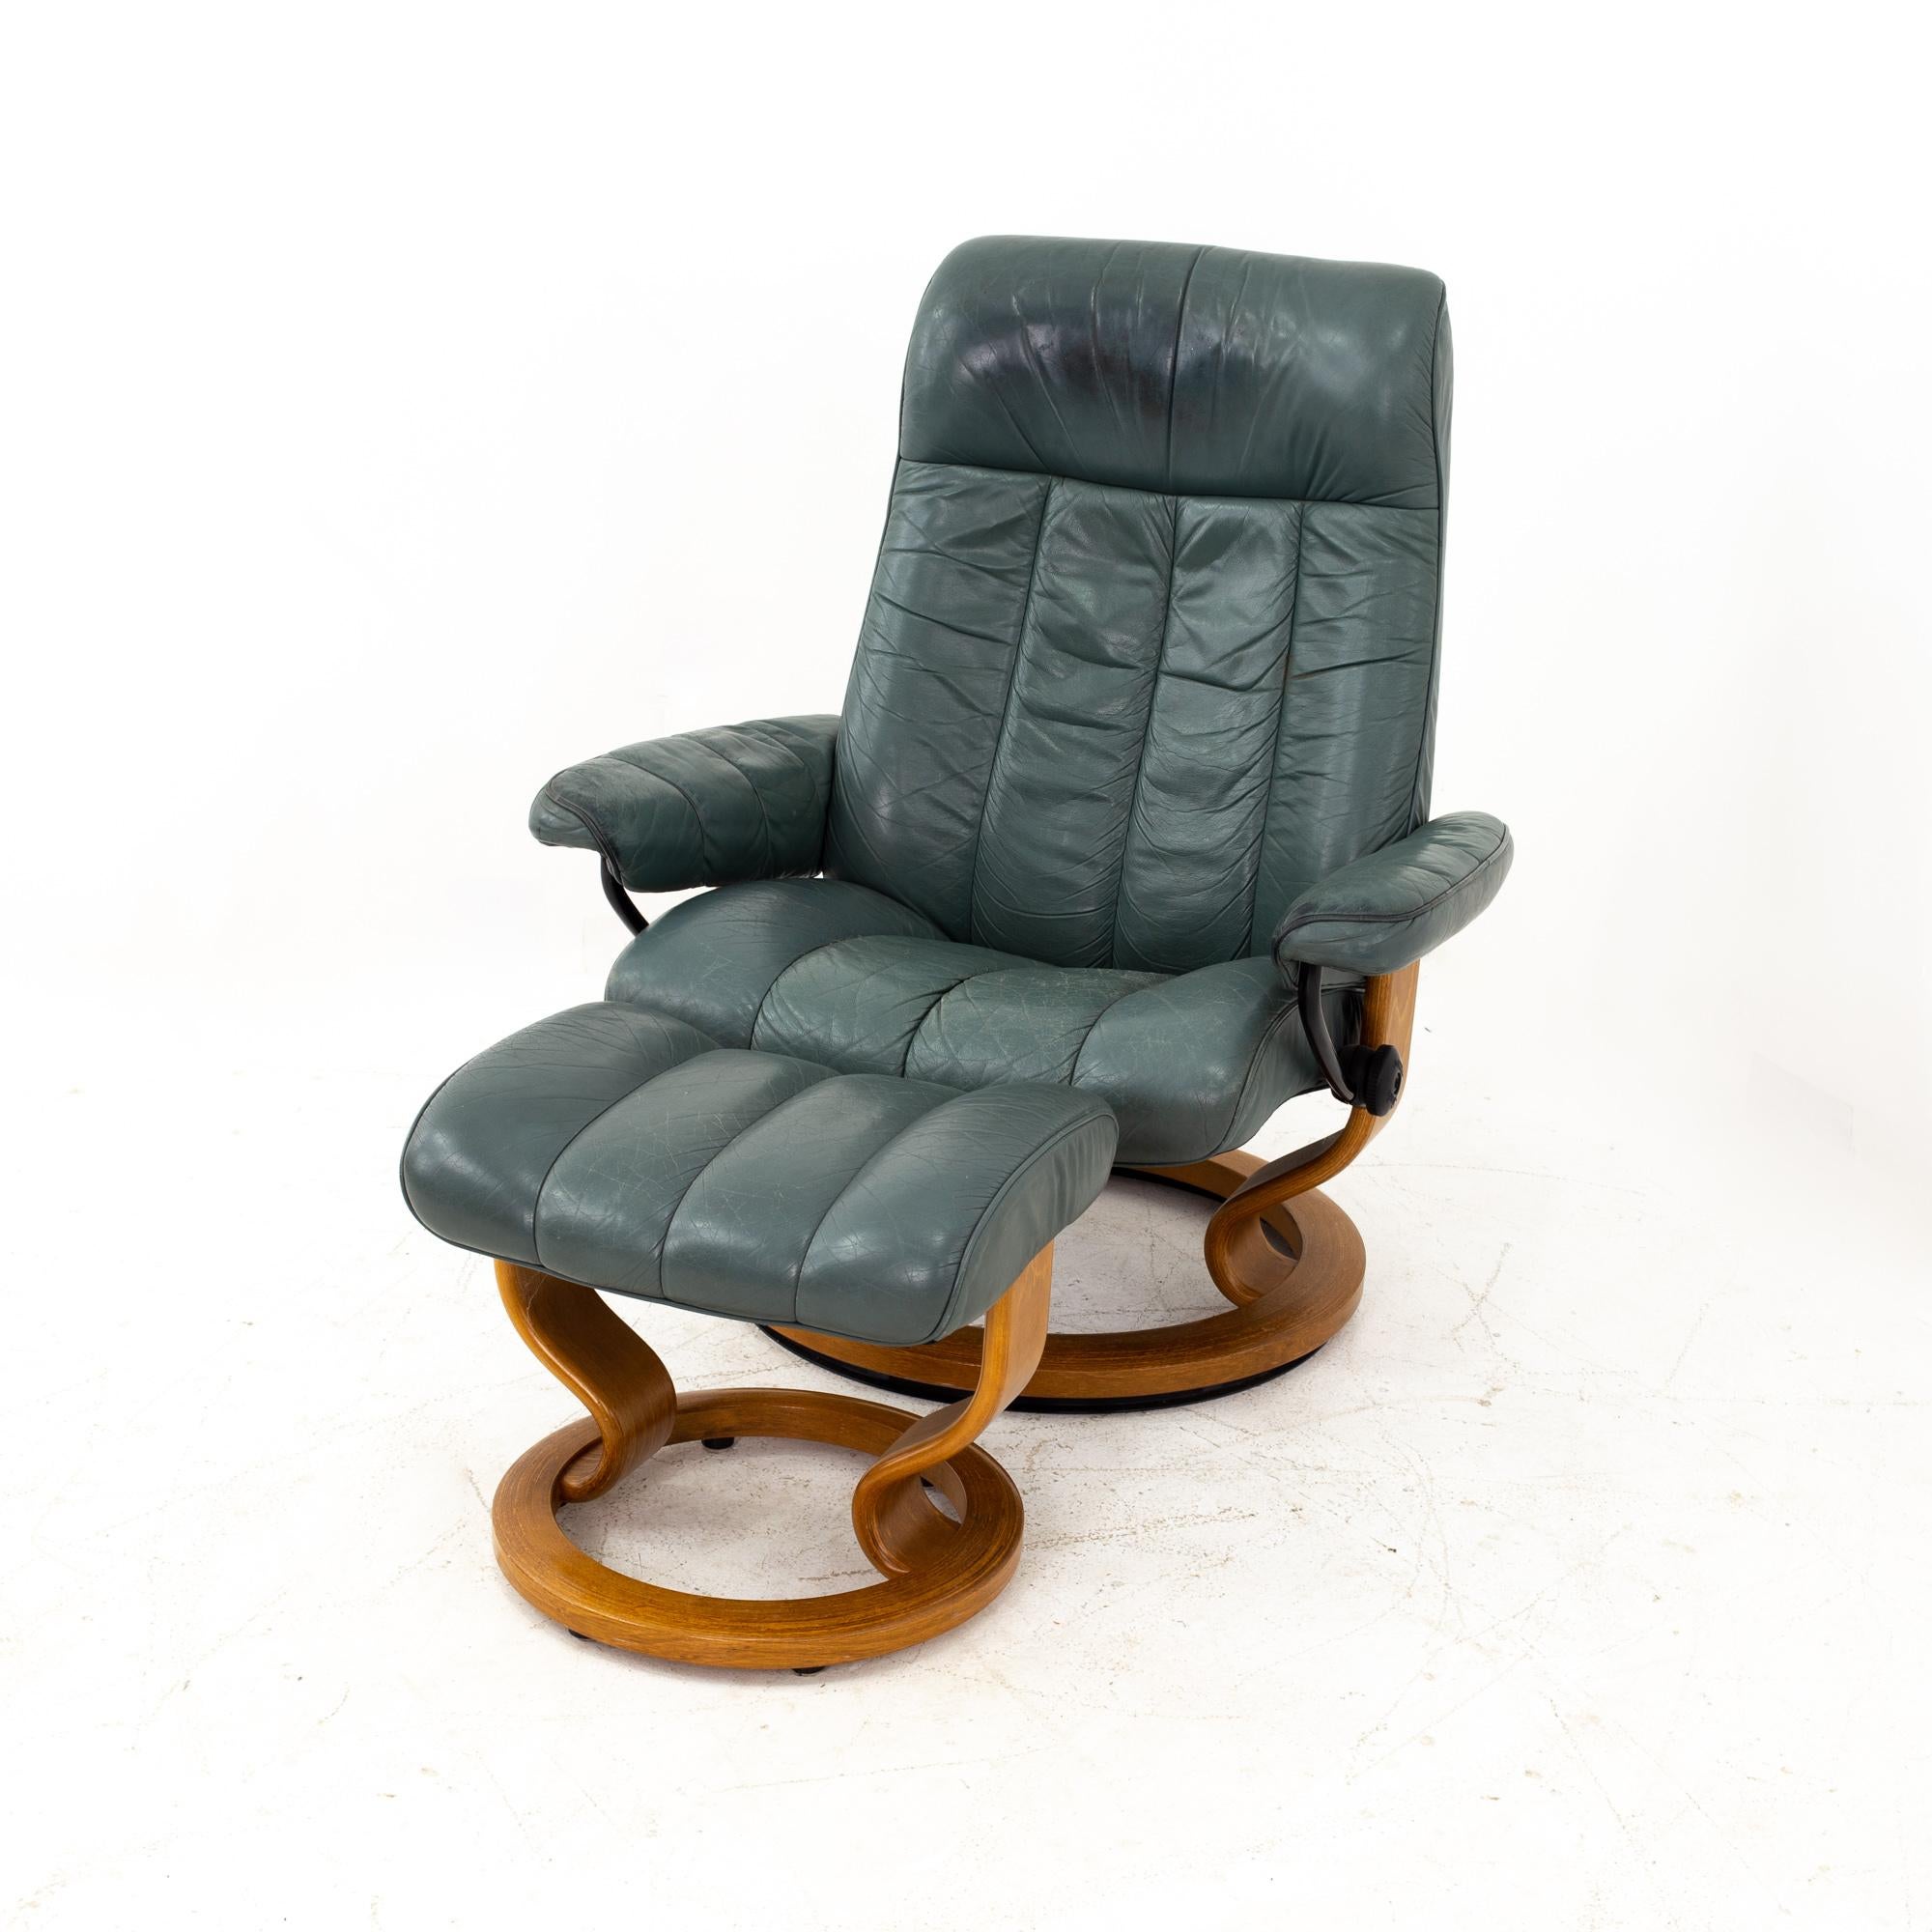 Ekornes midcentury gray stressless lounge chair and ottoman
Chair measures: 33 wide x 26 deep x 39.5 high, with a seat height of 16 inches
Ottoman measures: 21.5 wide x 18 deep x 15 high

Each piece of furniture is available in what we call